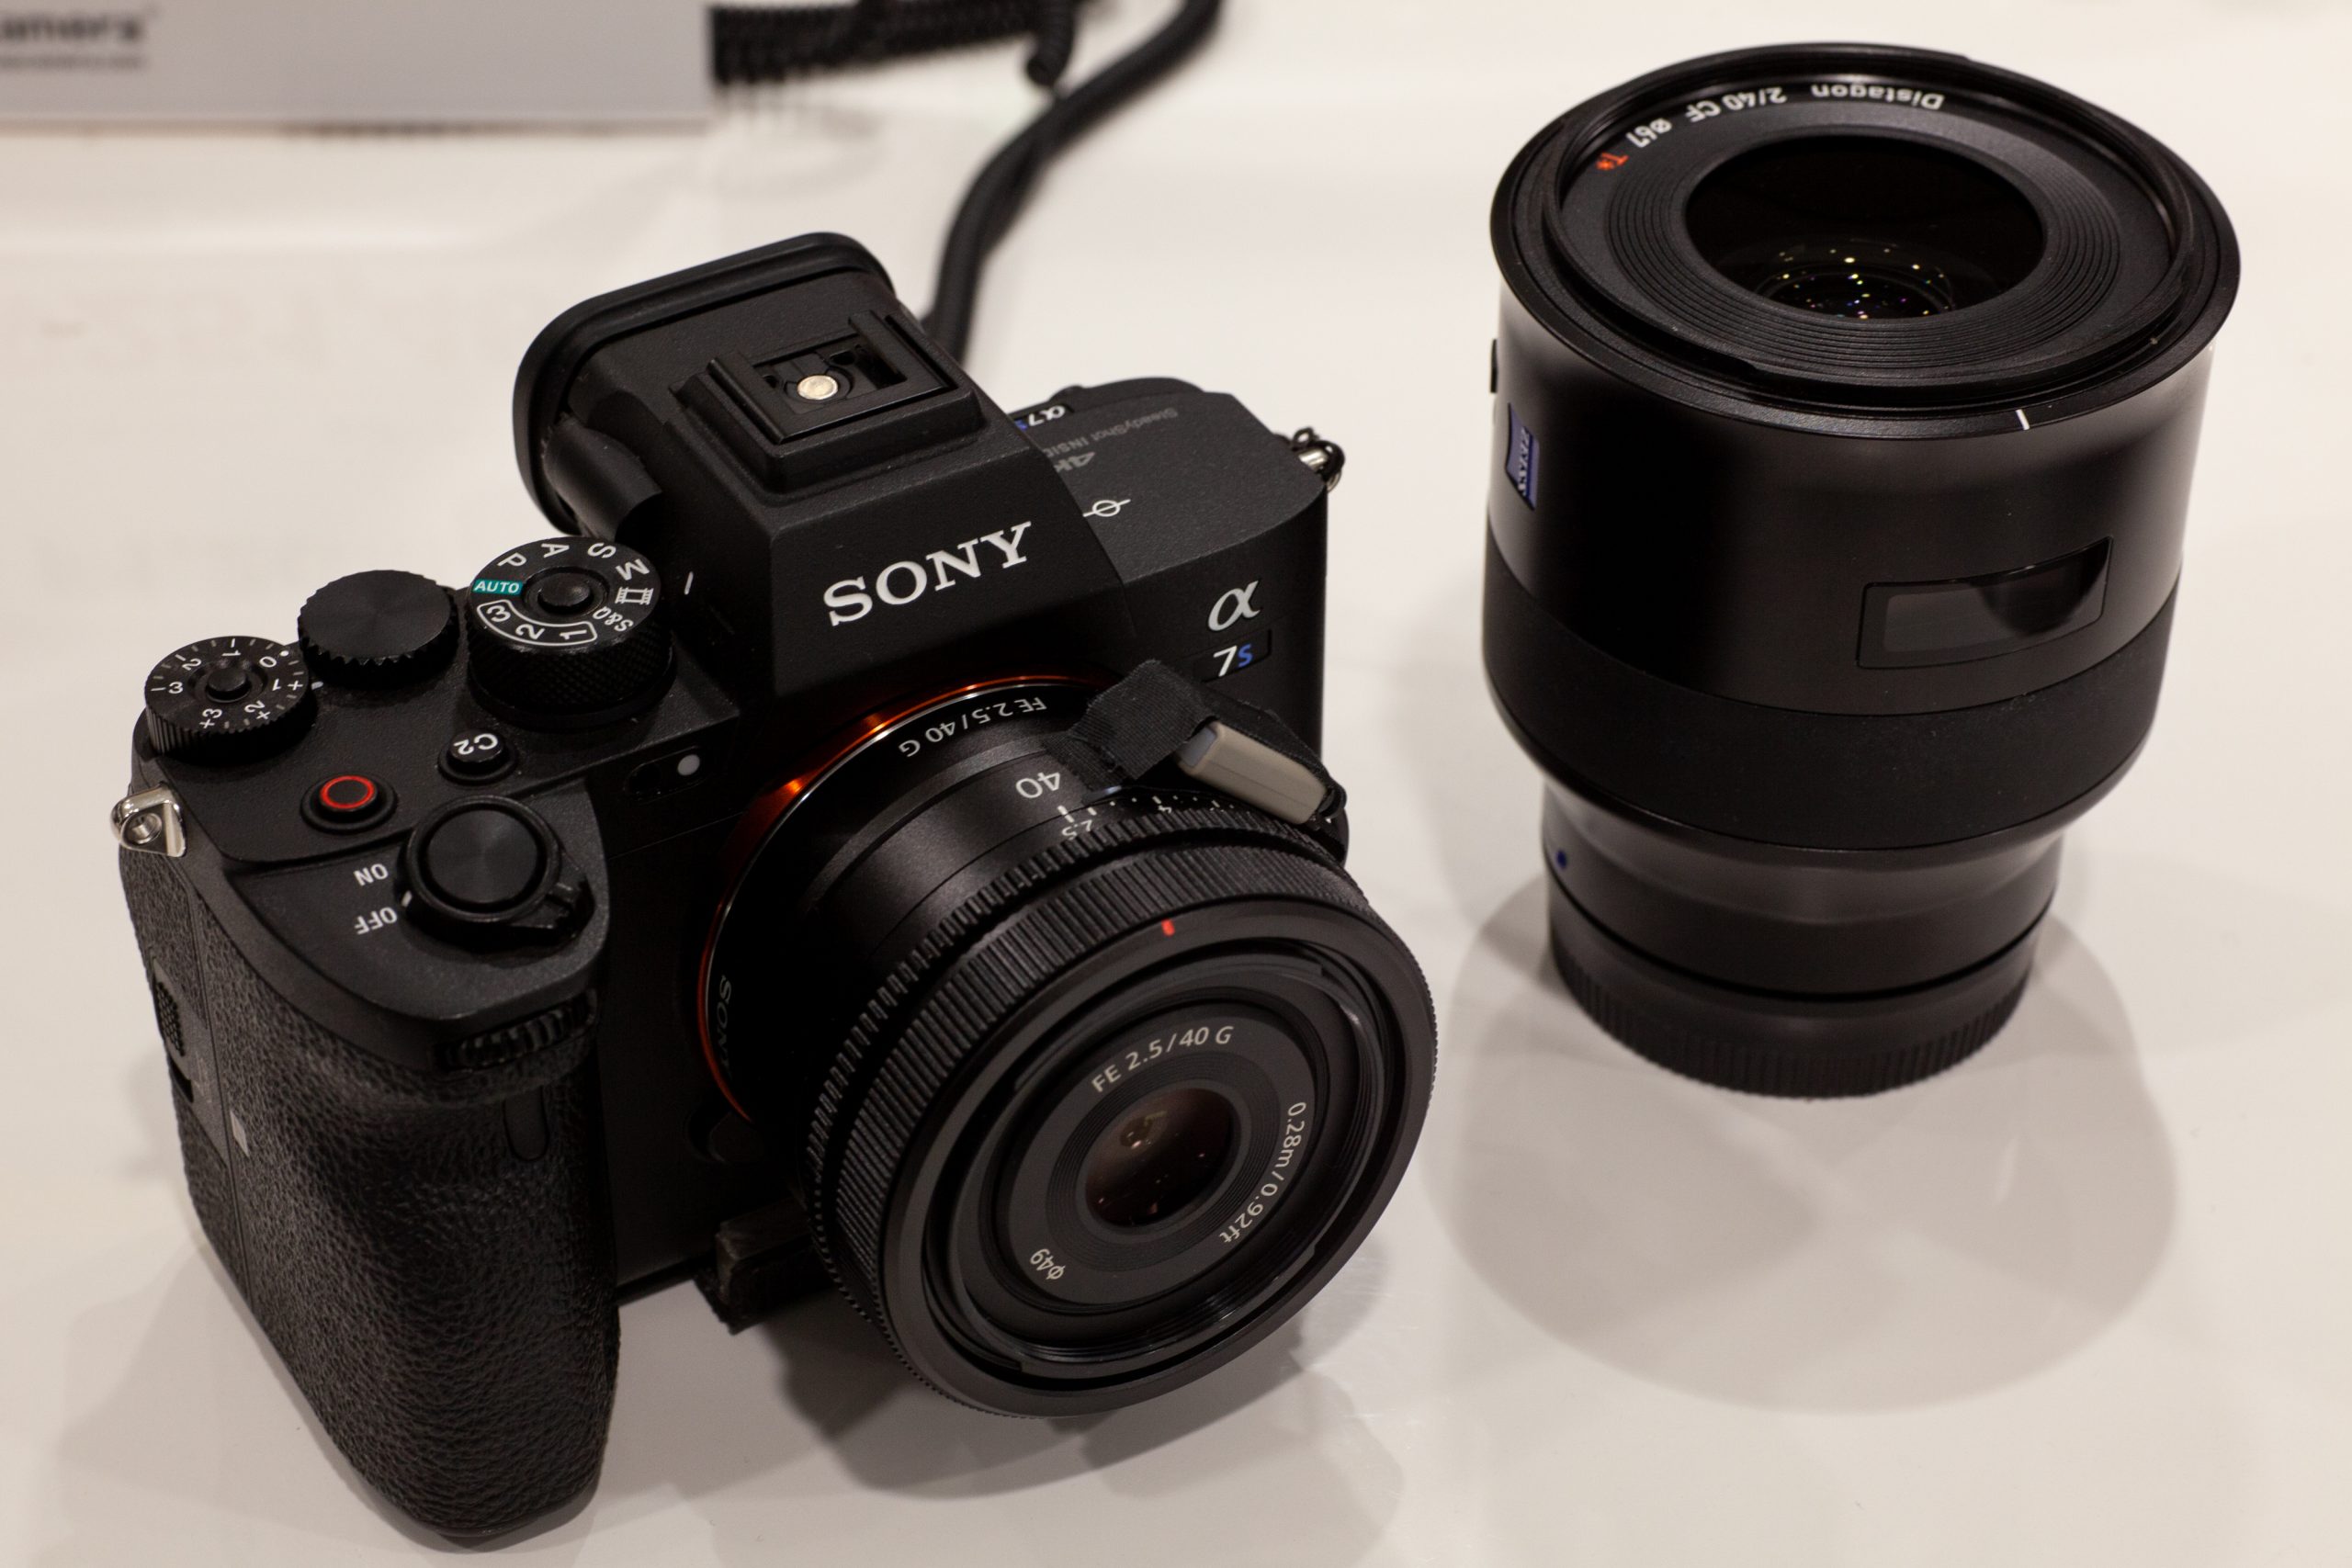 SONY】α Like Vol.11 「推し40mm」はどっち？ | THE MAP TIMES